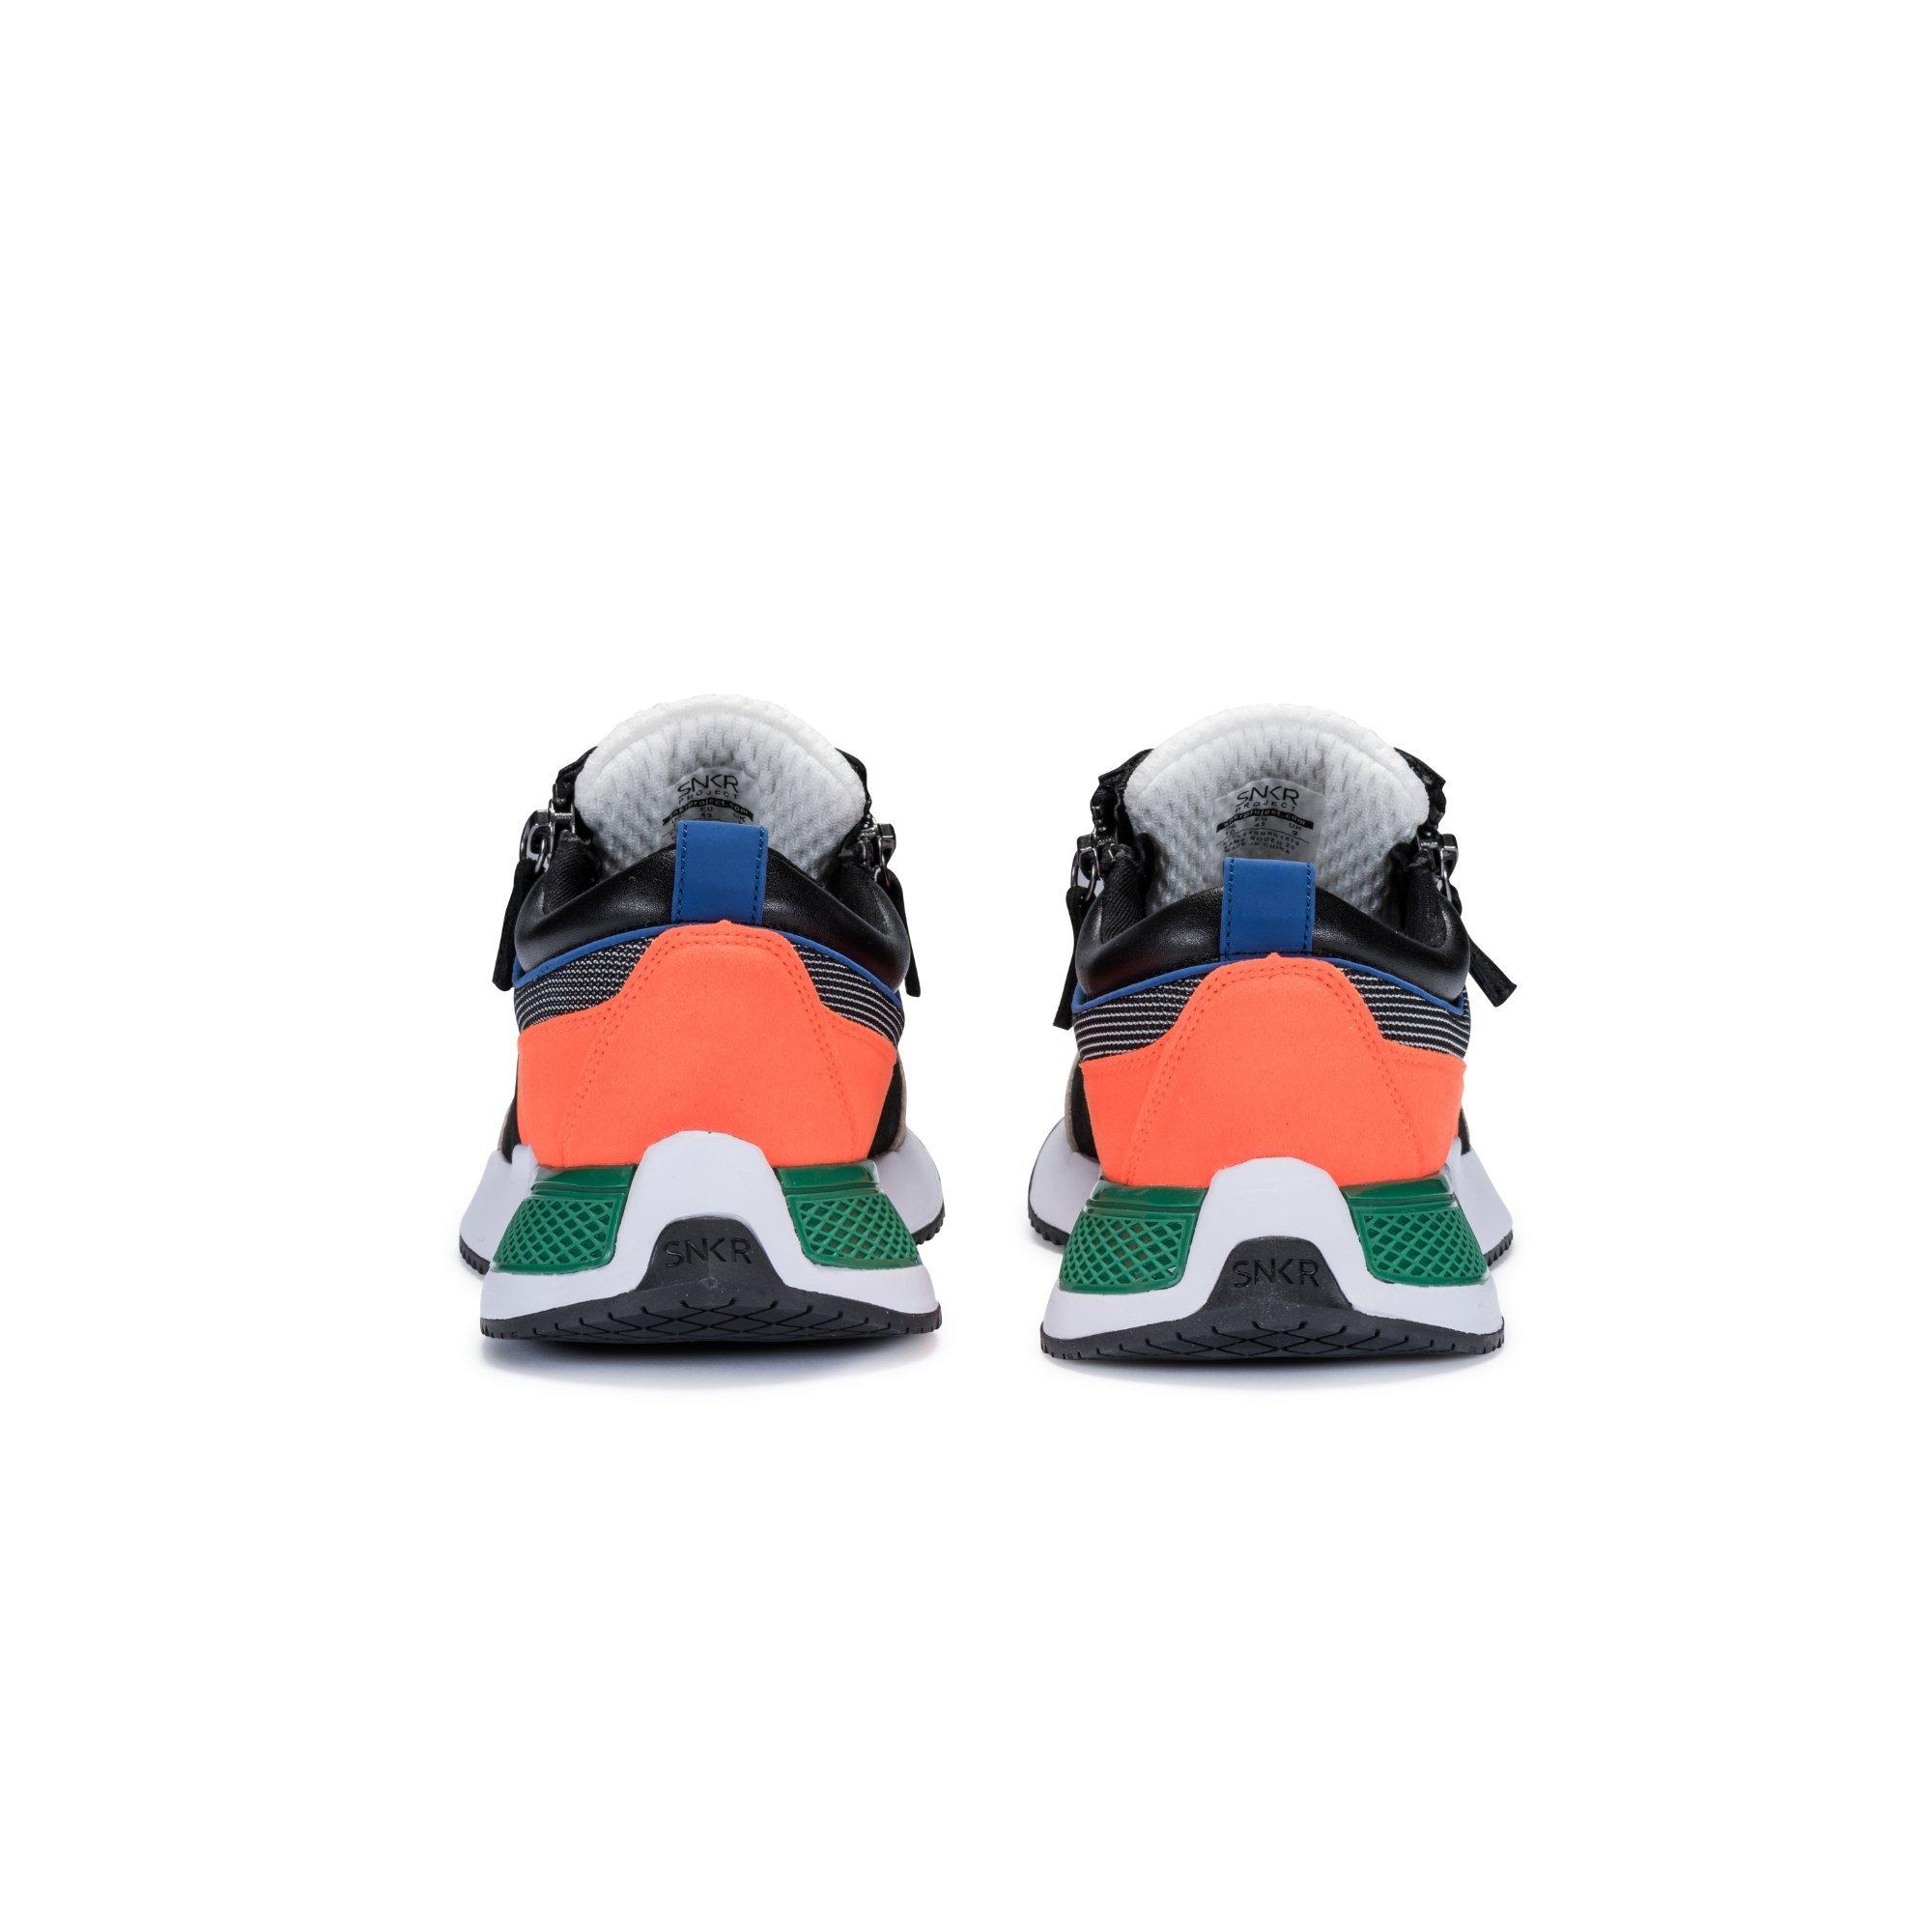 men's snkr project rodeo 2.0 casual shoes